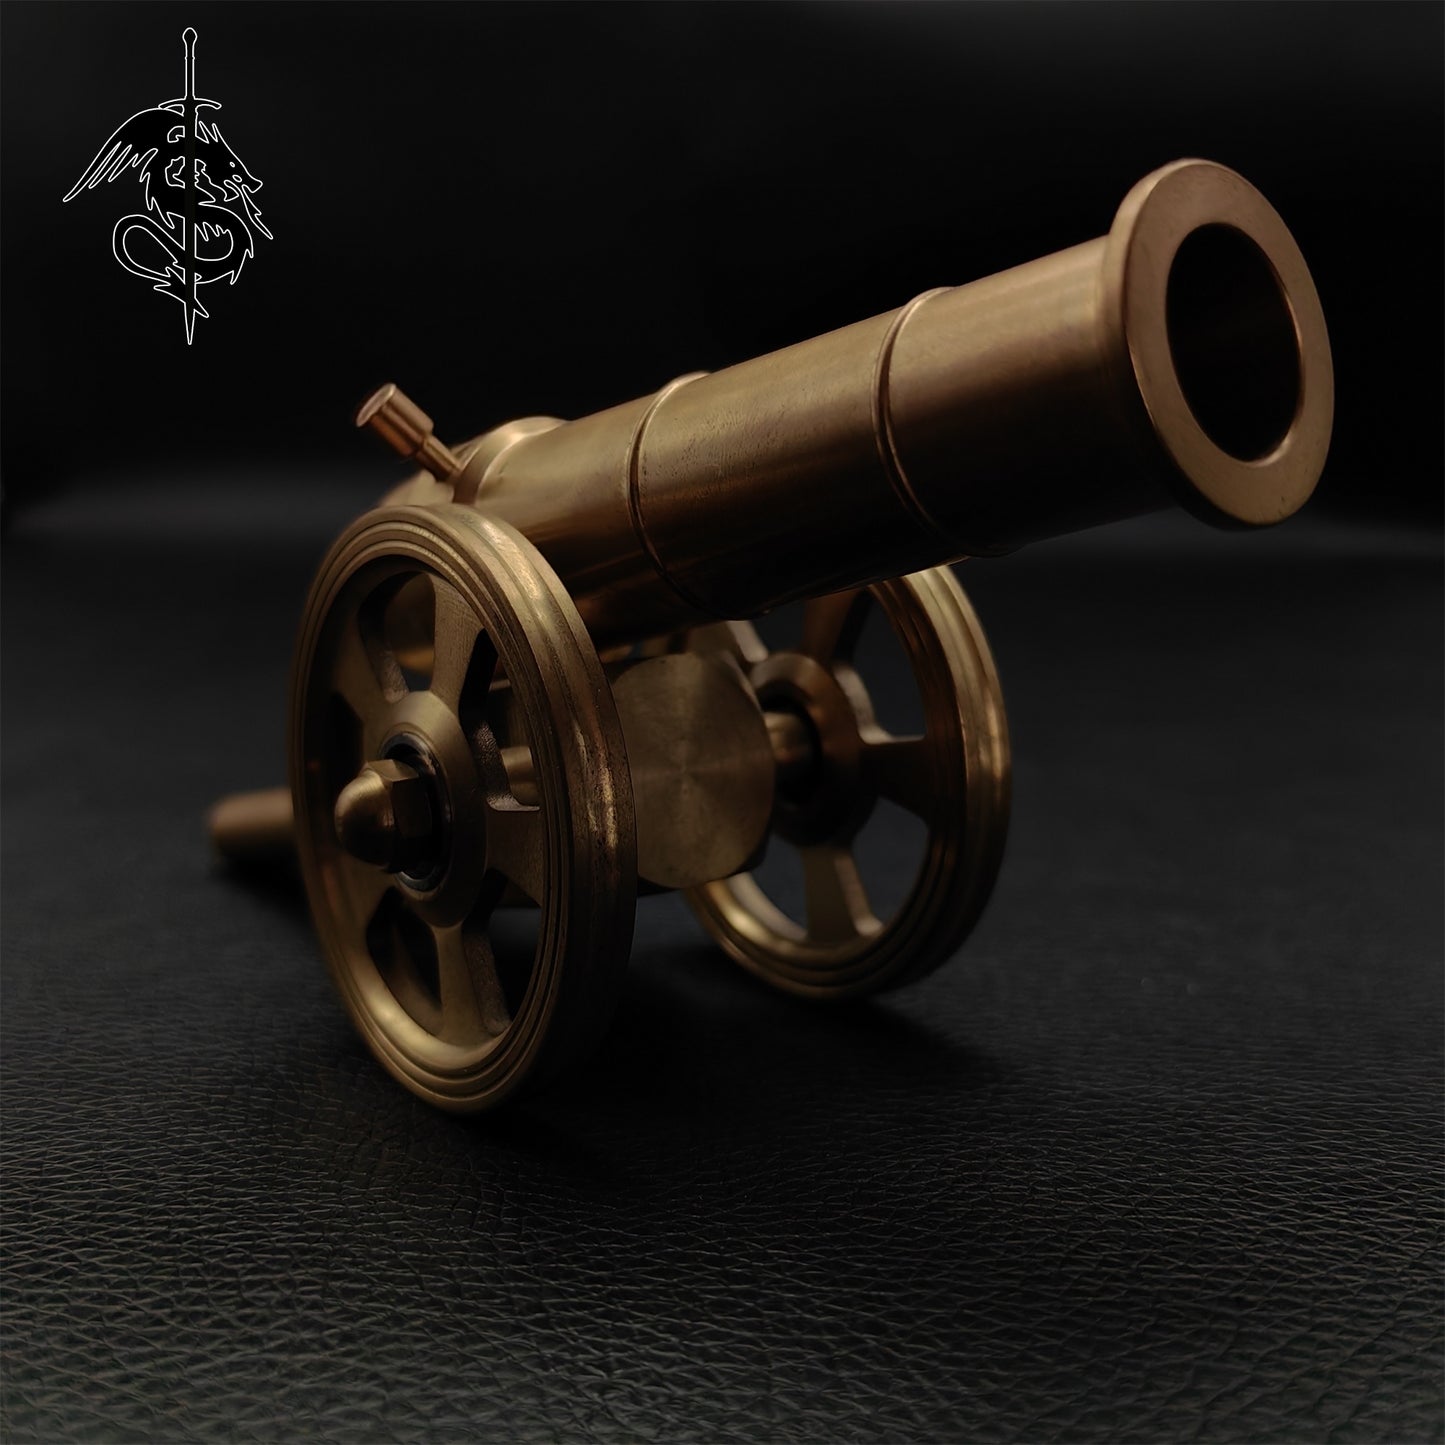 Brass Cannon Miniature Smoothbore Toy Cannon